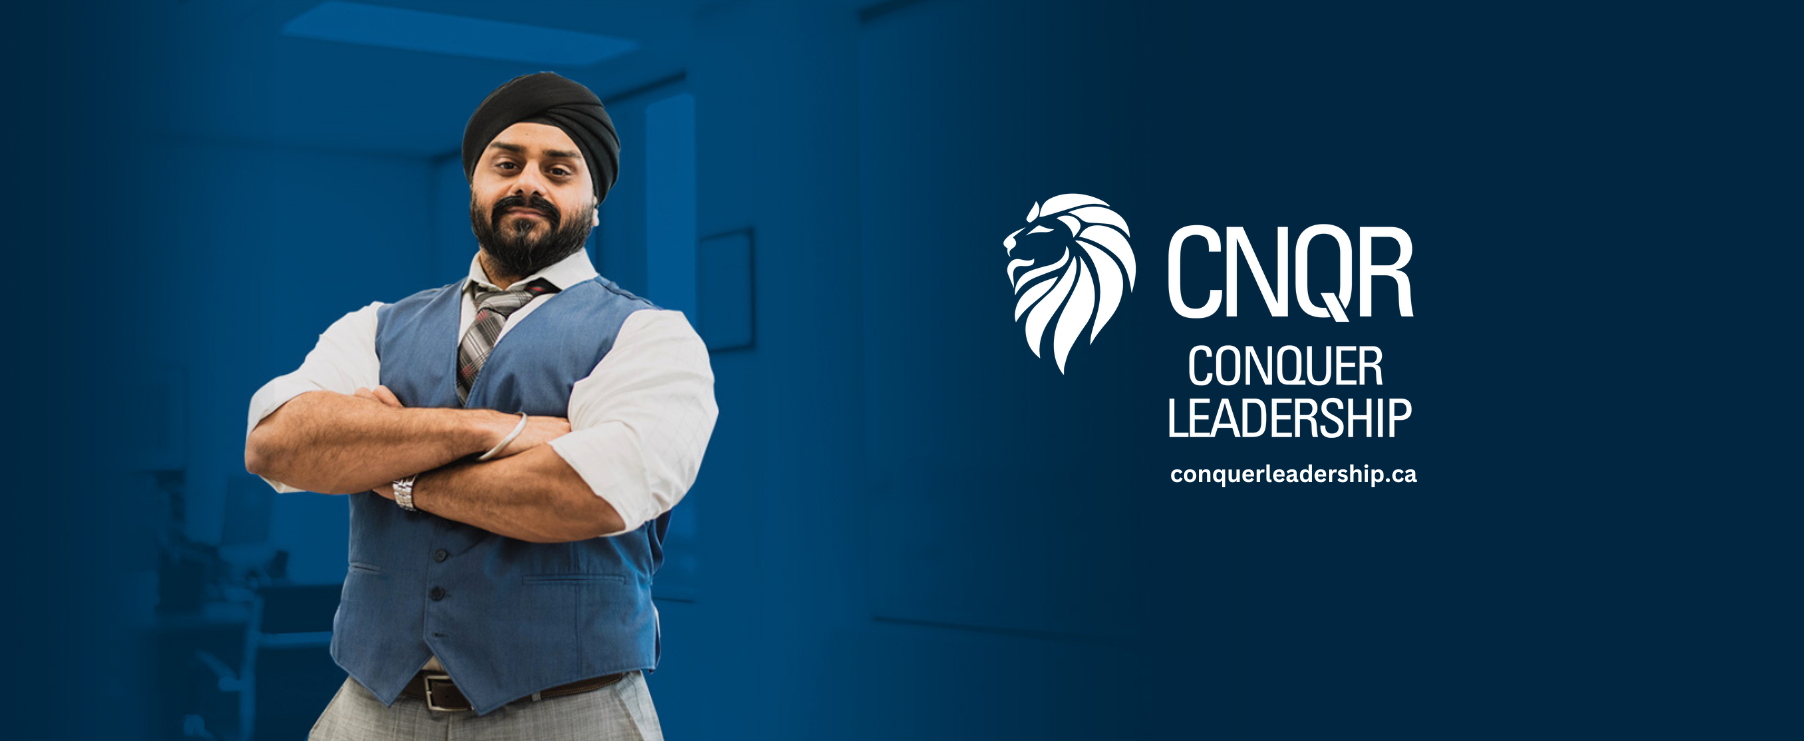 Parm Chohan owner of Conquer Leadership